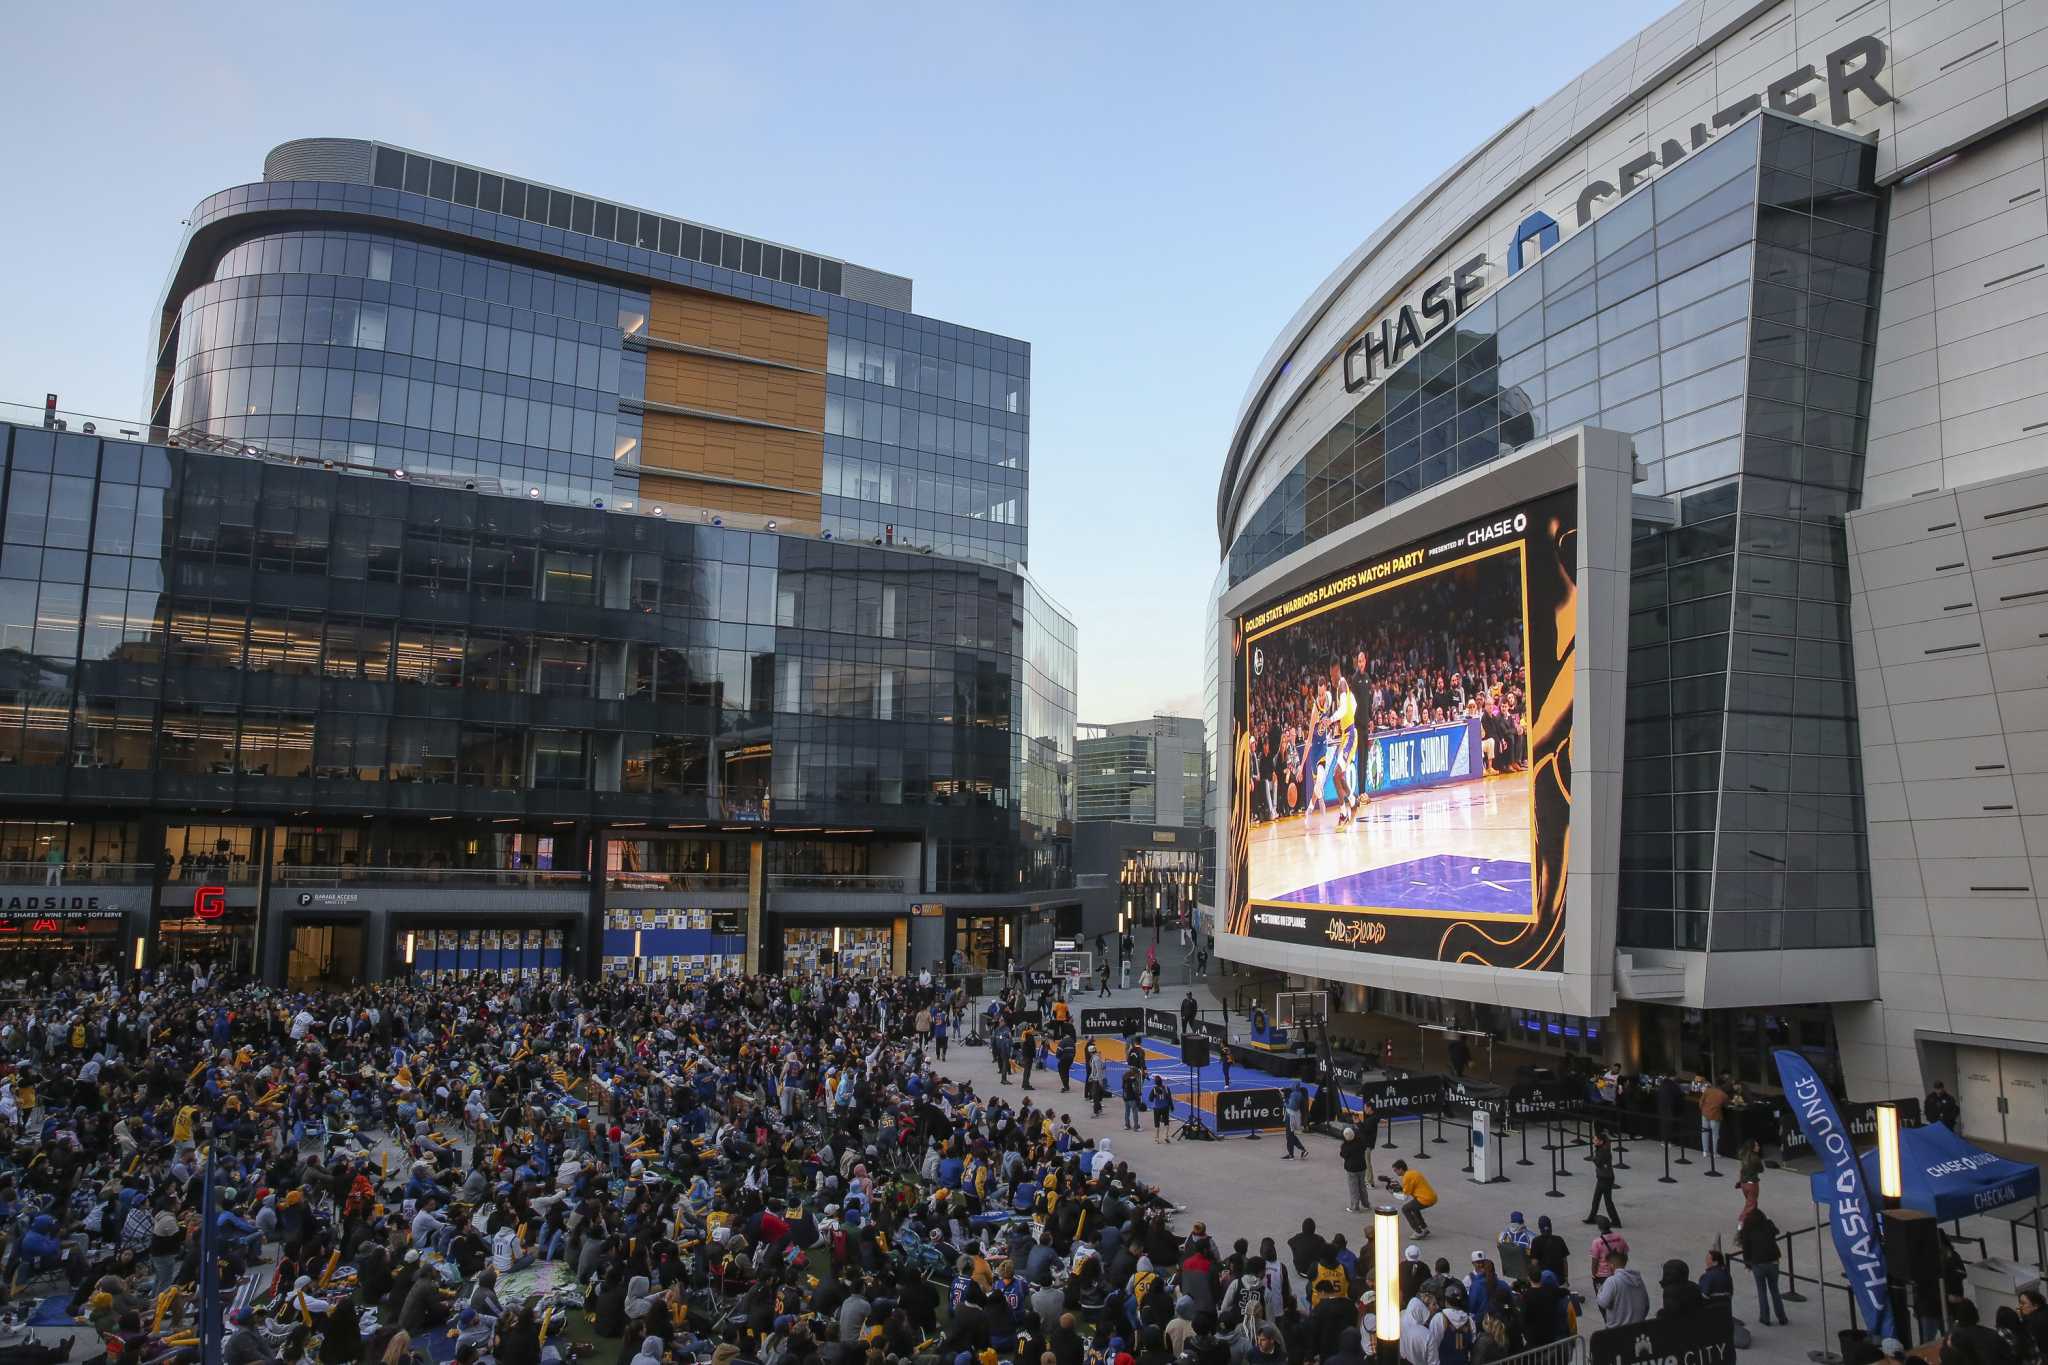 San Francisco bids to host 2025 NBA All-Star Game at Chase Center